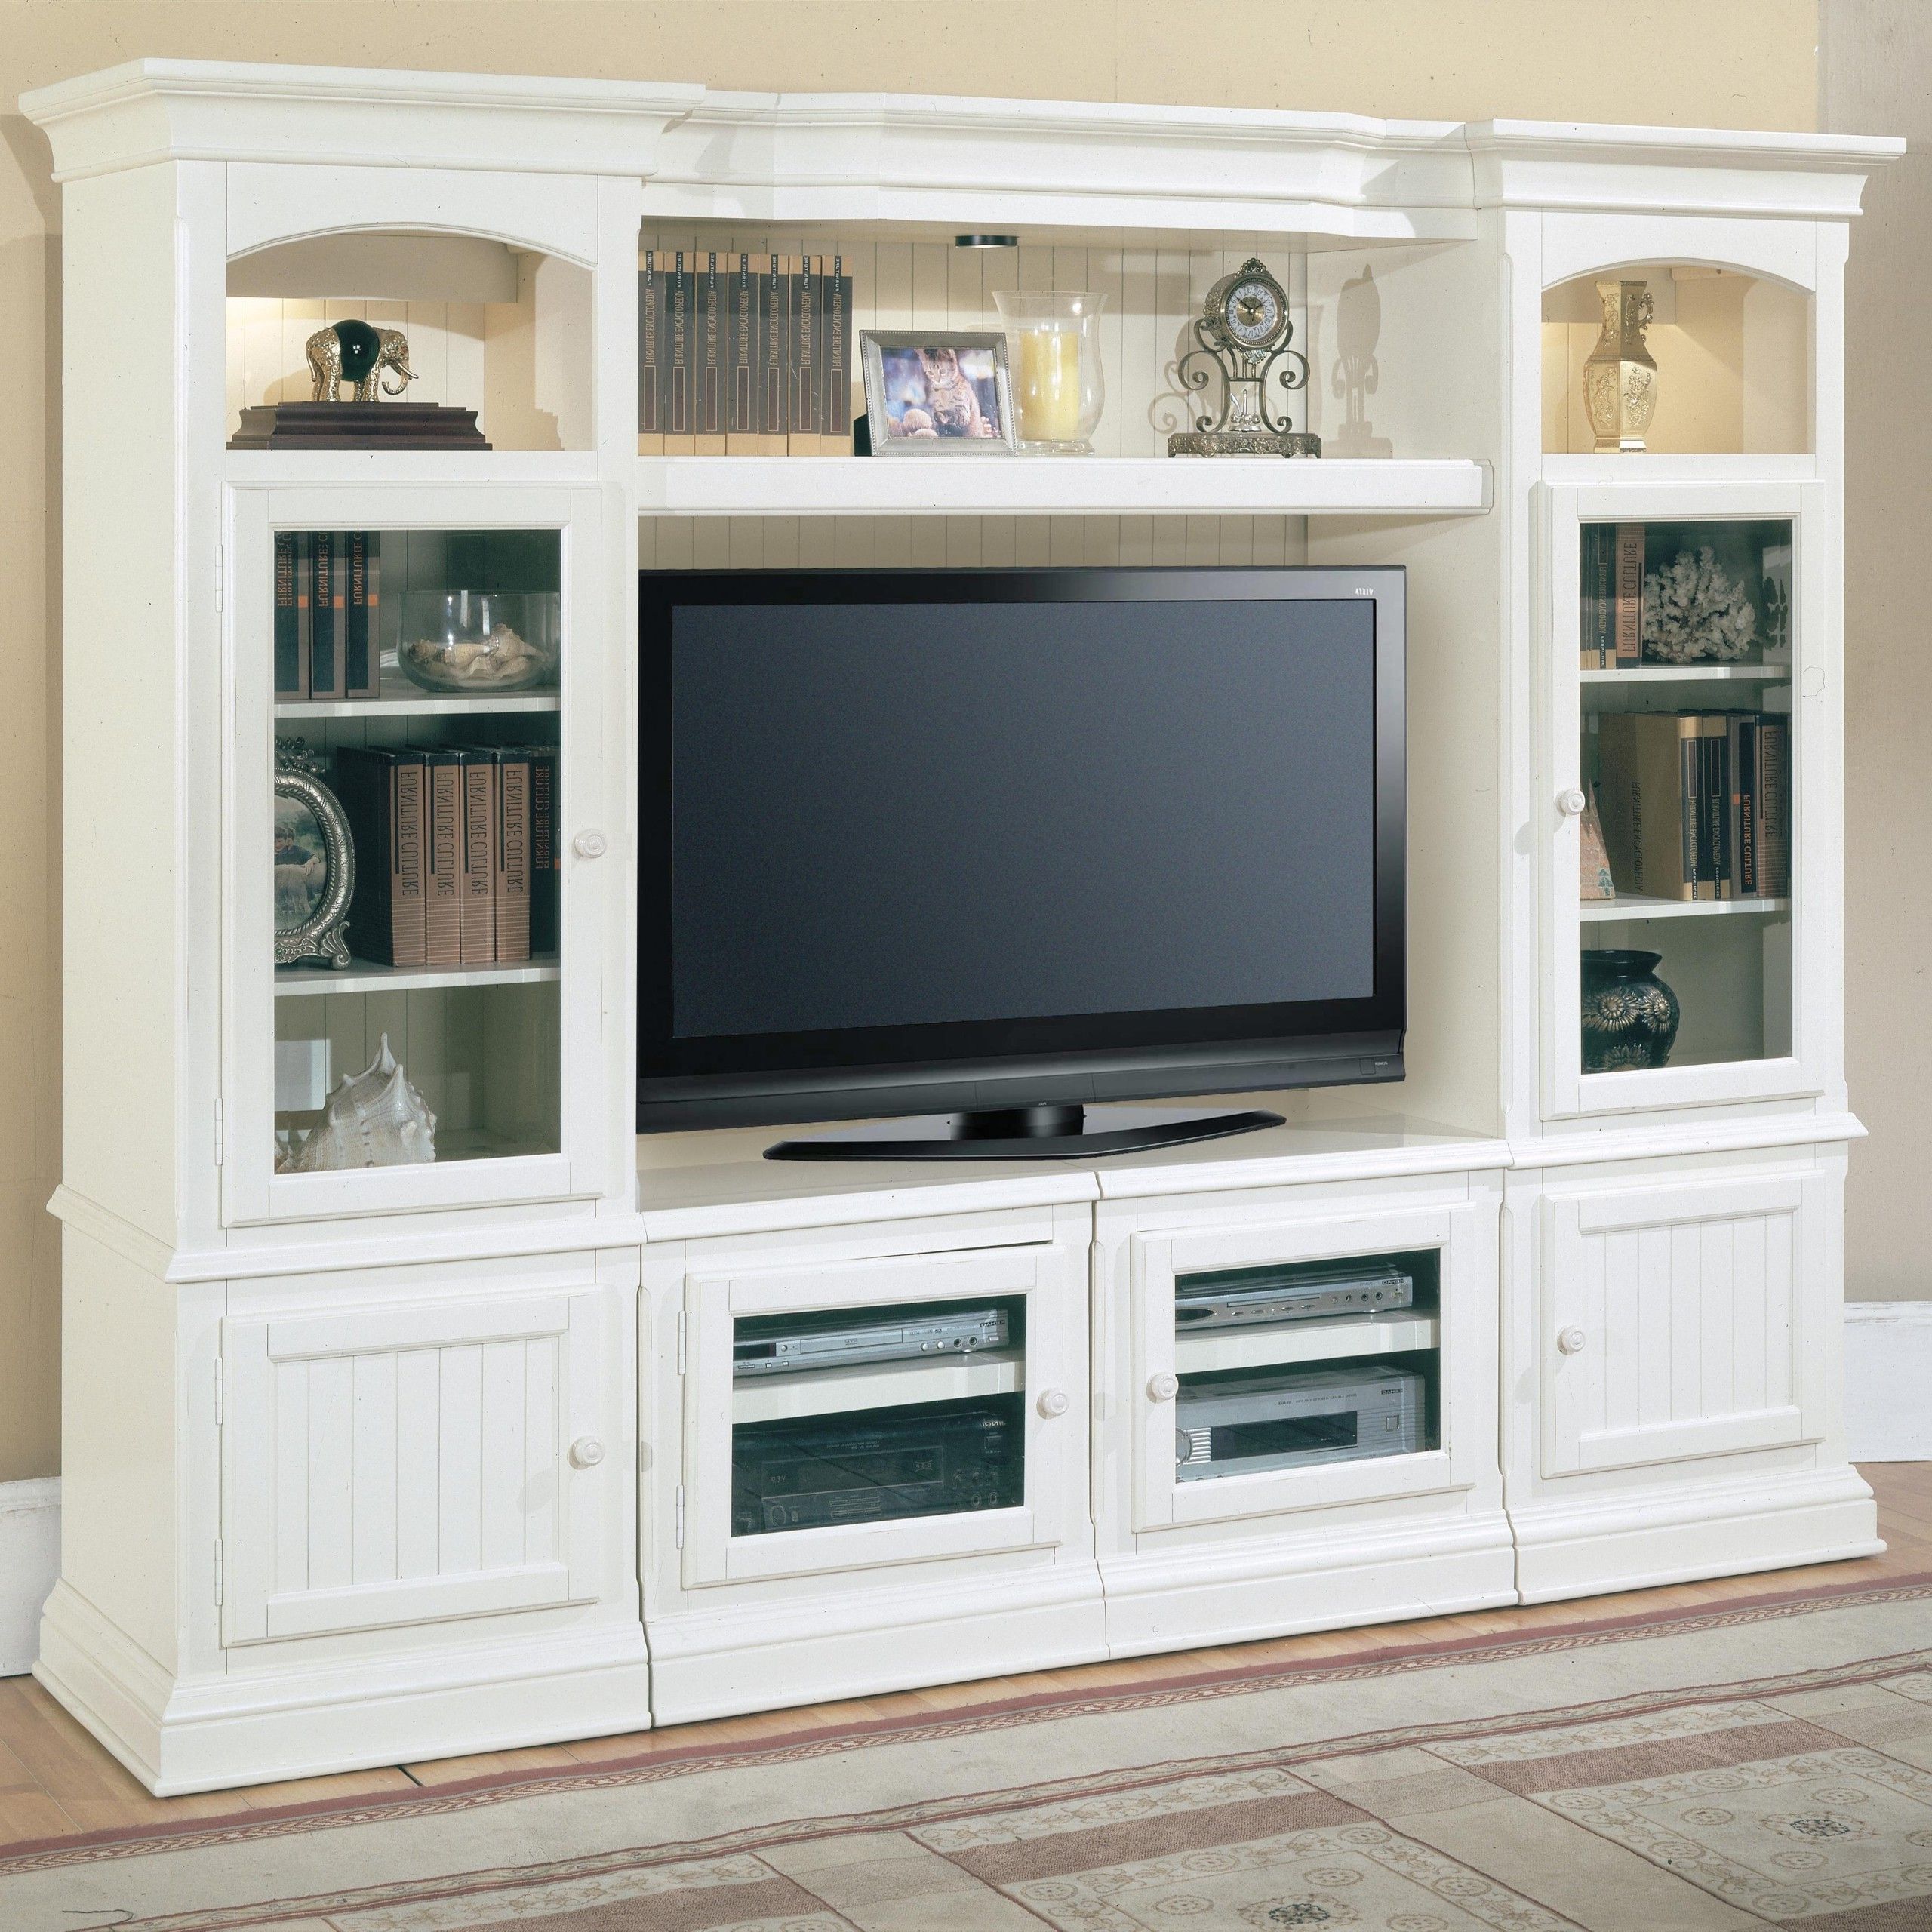 2020 Traditional Entertainment Wall Units – Ideas On Foter In Entertainment Units With Bridge (View 14 of 15)